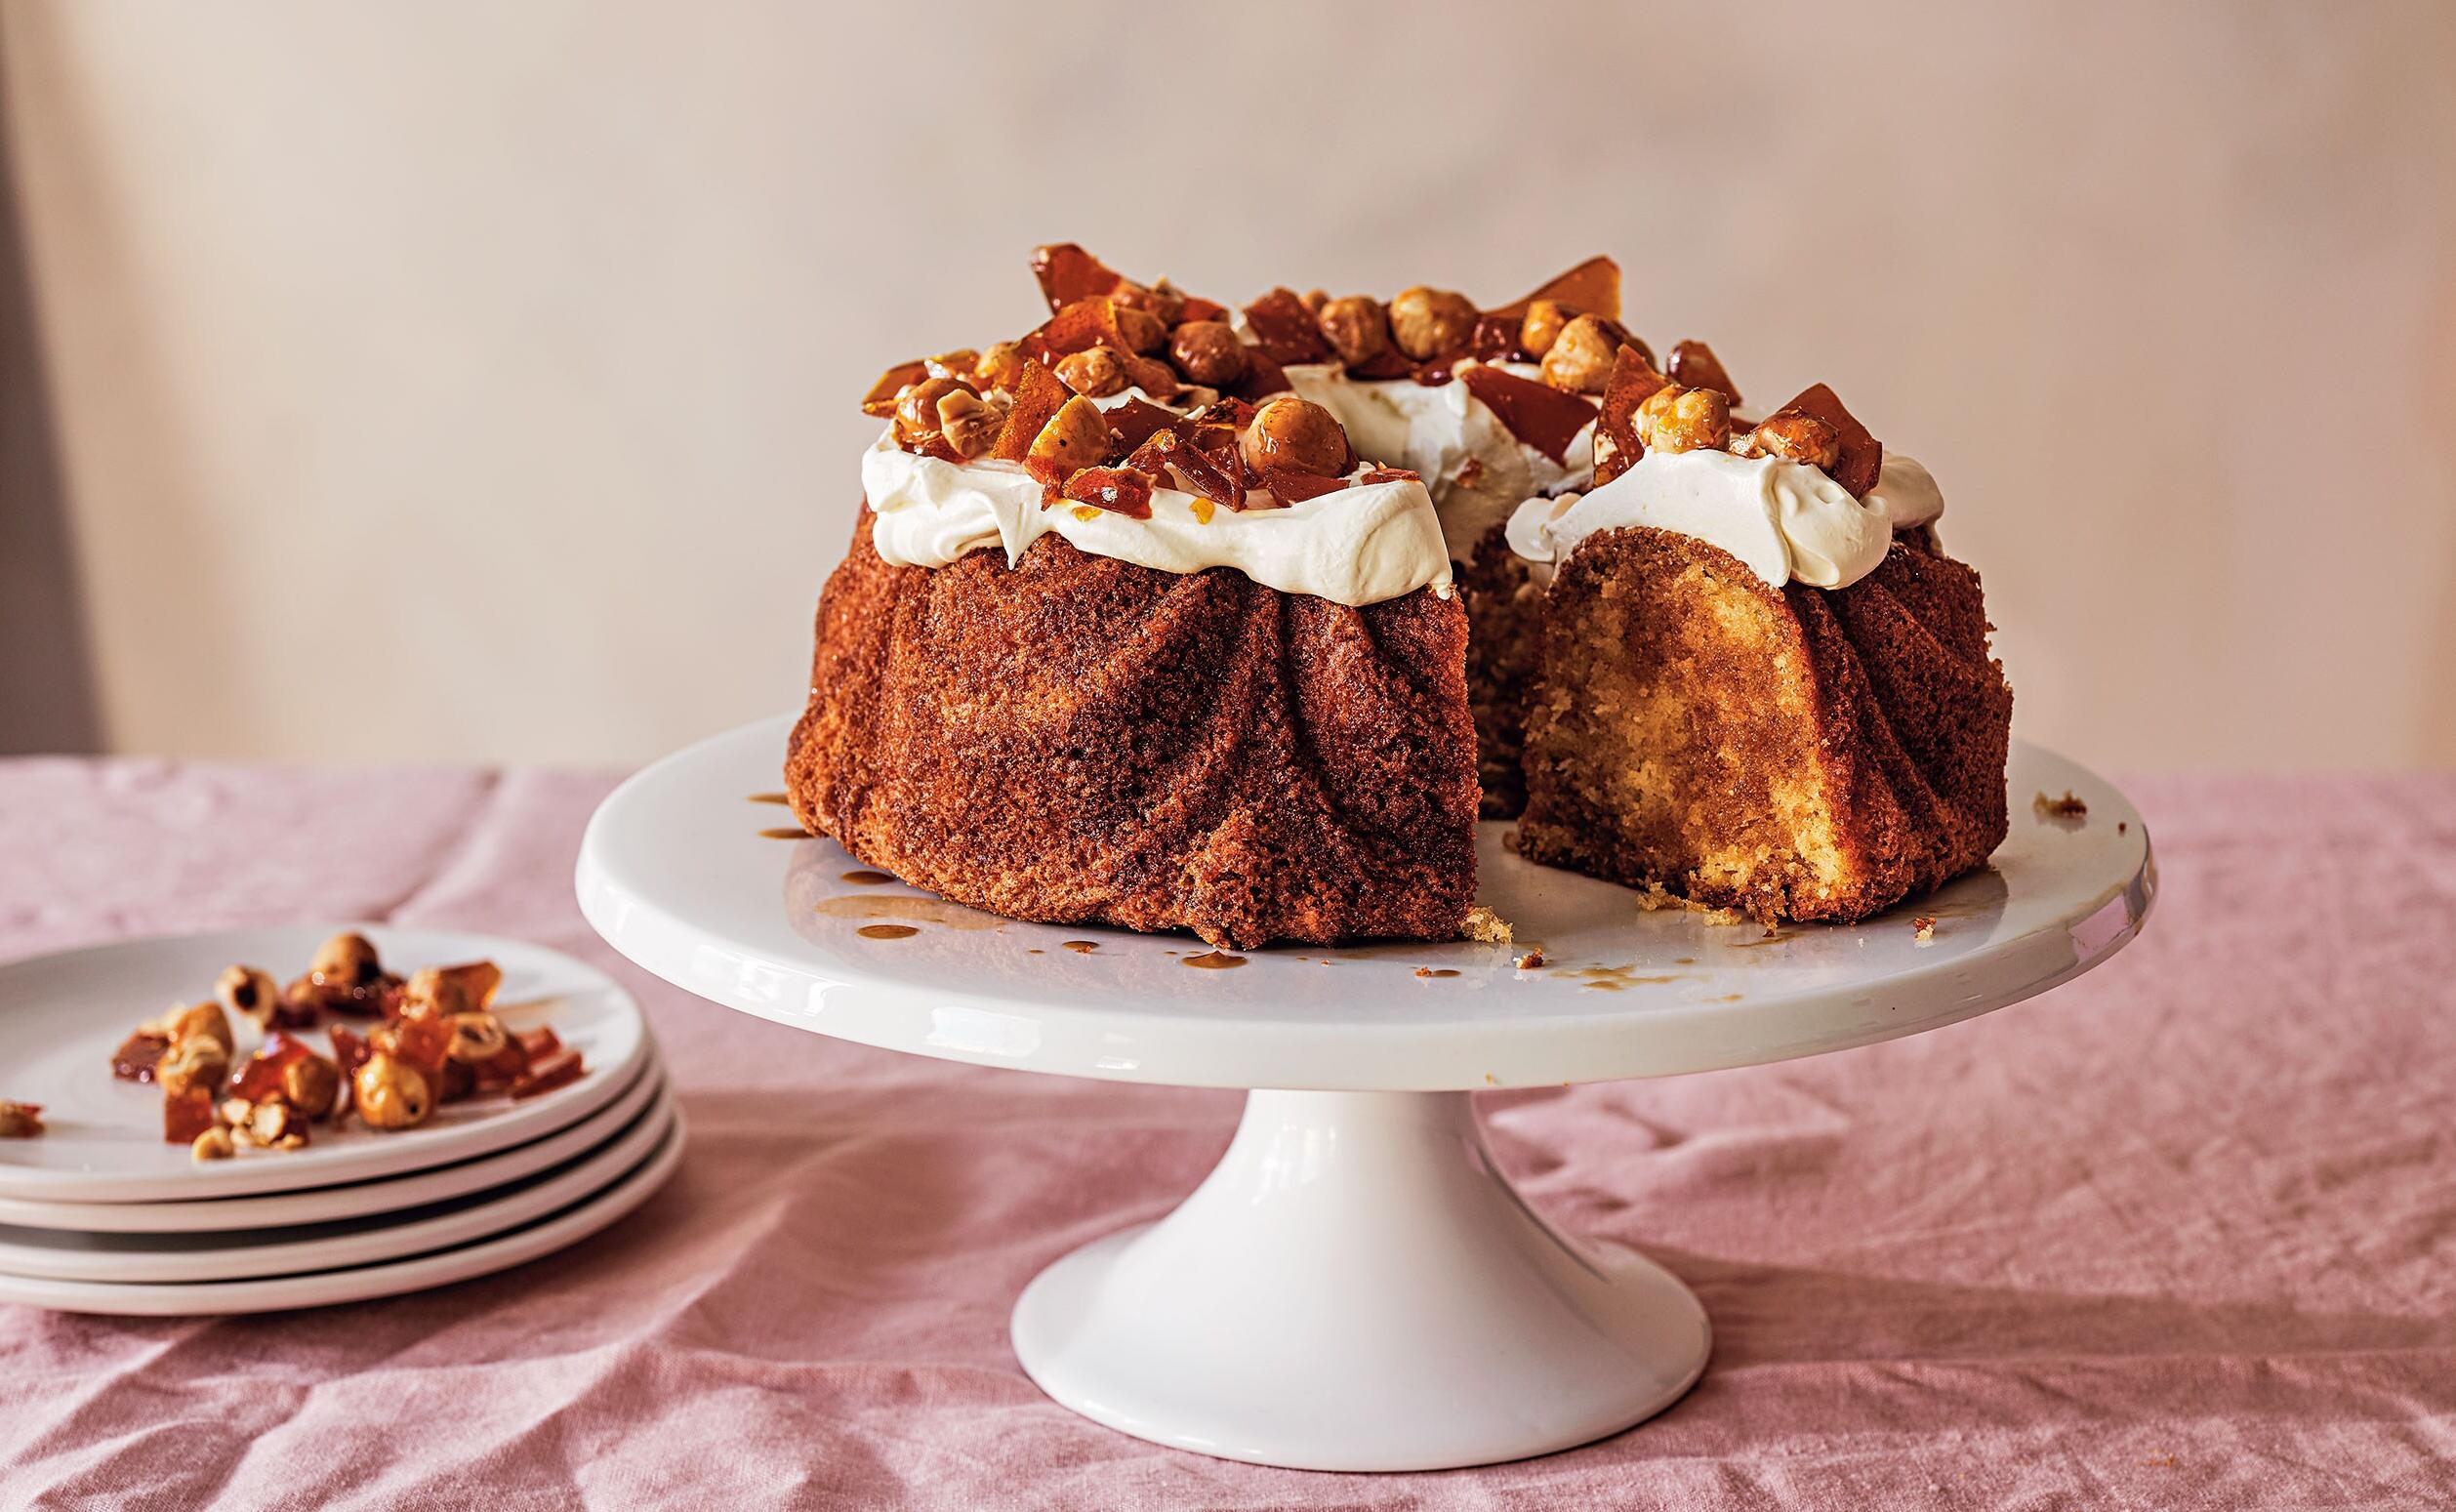  With cinnamon, nutmeg, and allspice in the mix, the aroma of this cake will fill your home with warmth and comfort.